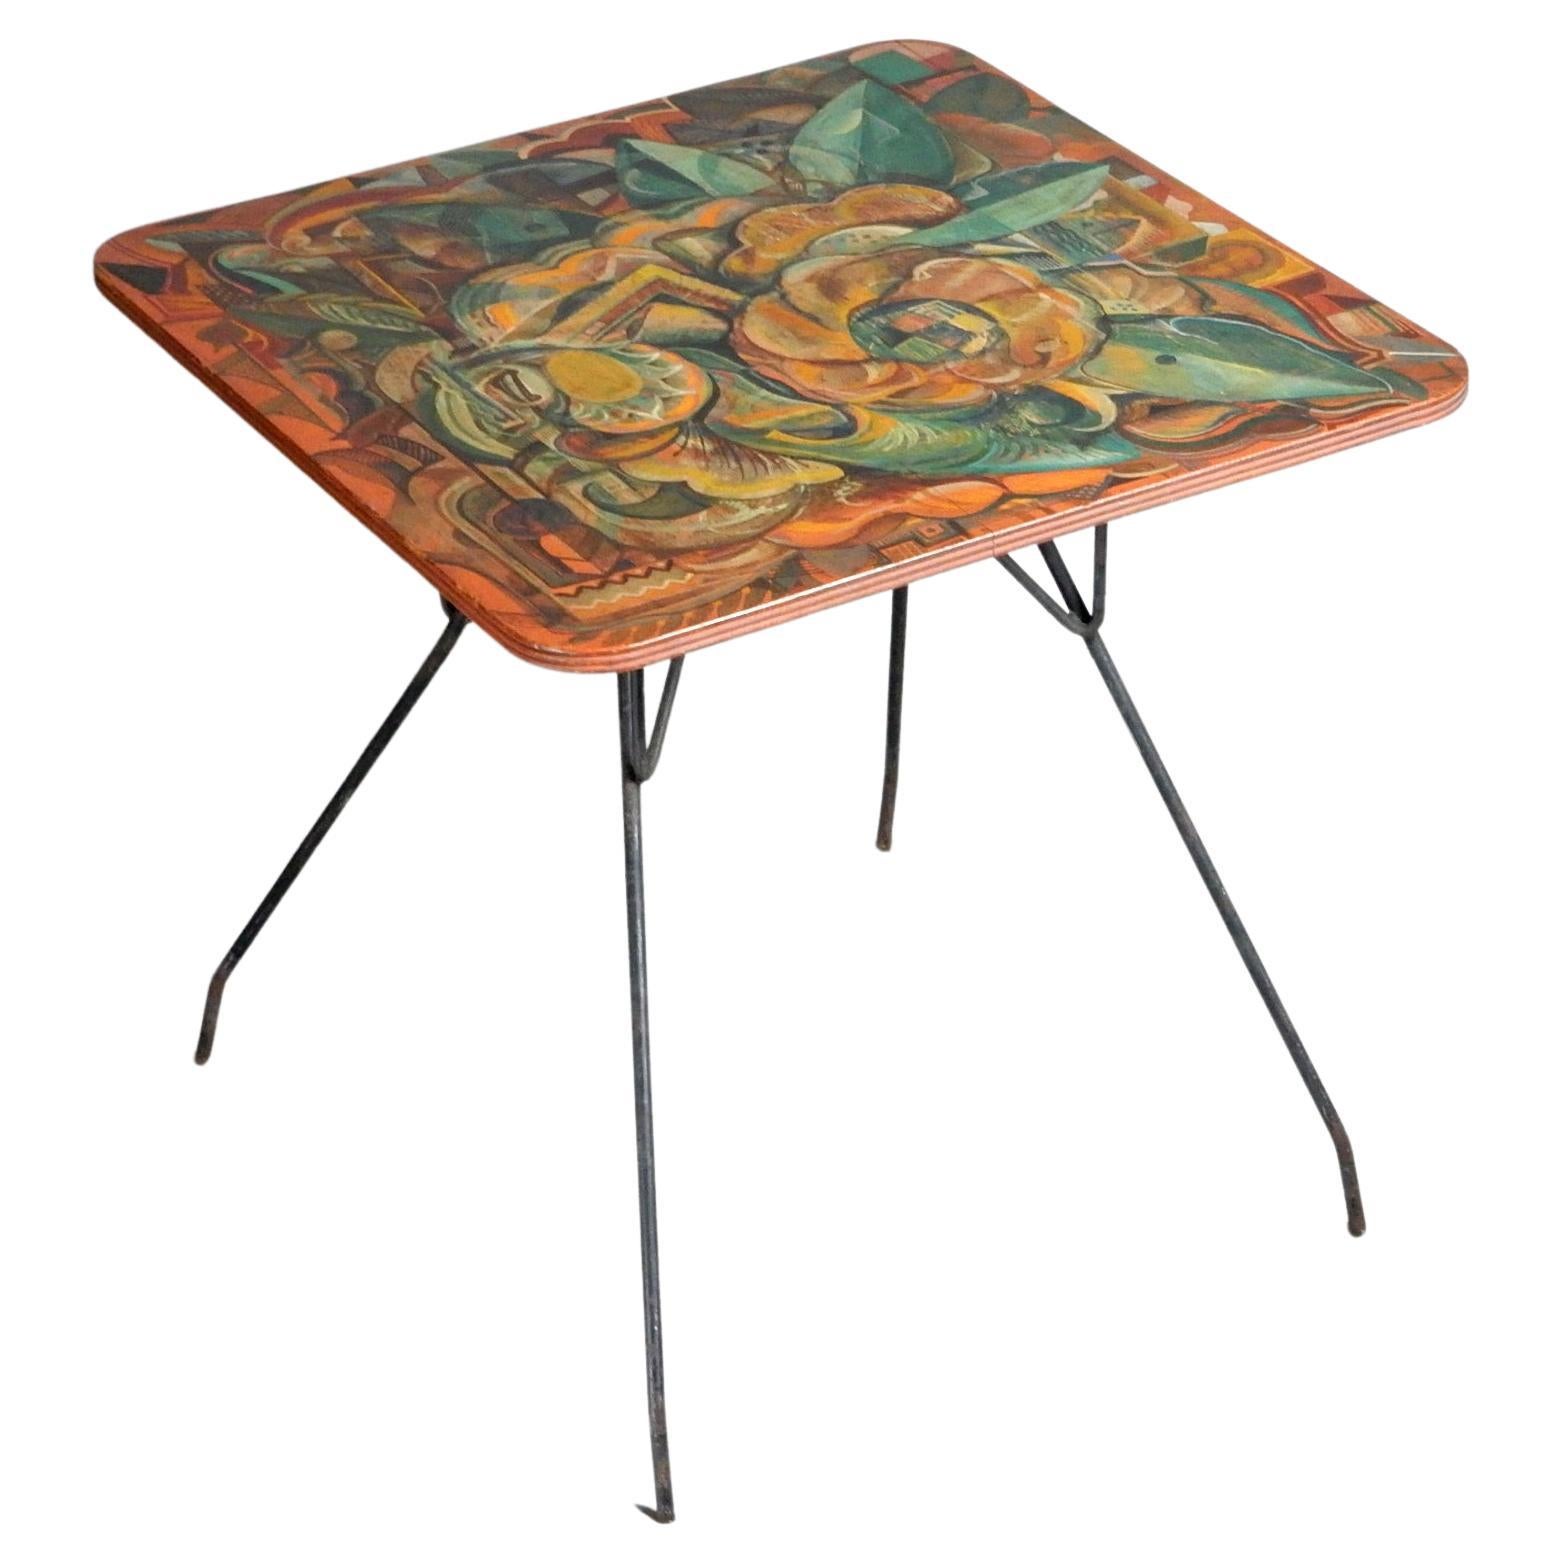  Early 20th-Century Avant-Garde Painted Table with Mexican Muralism Painting For Sale 3